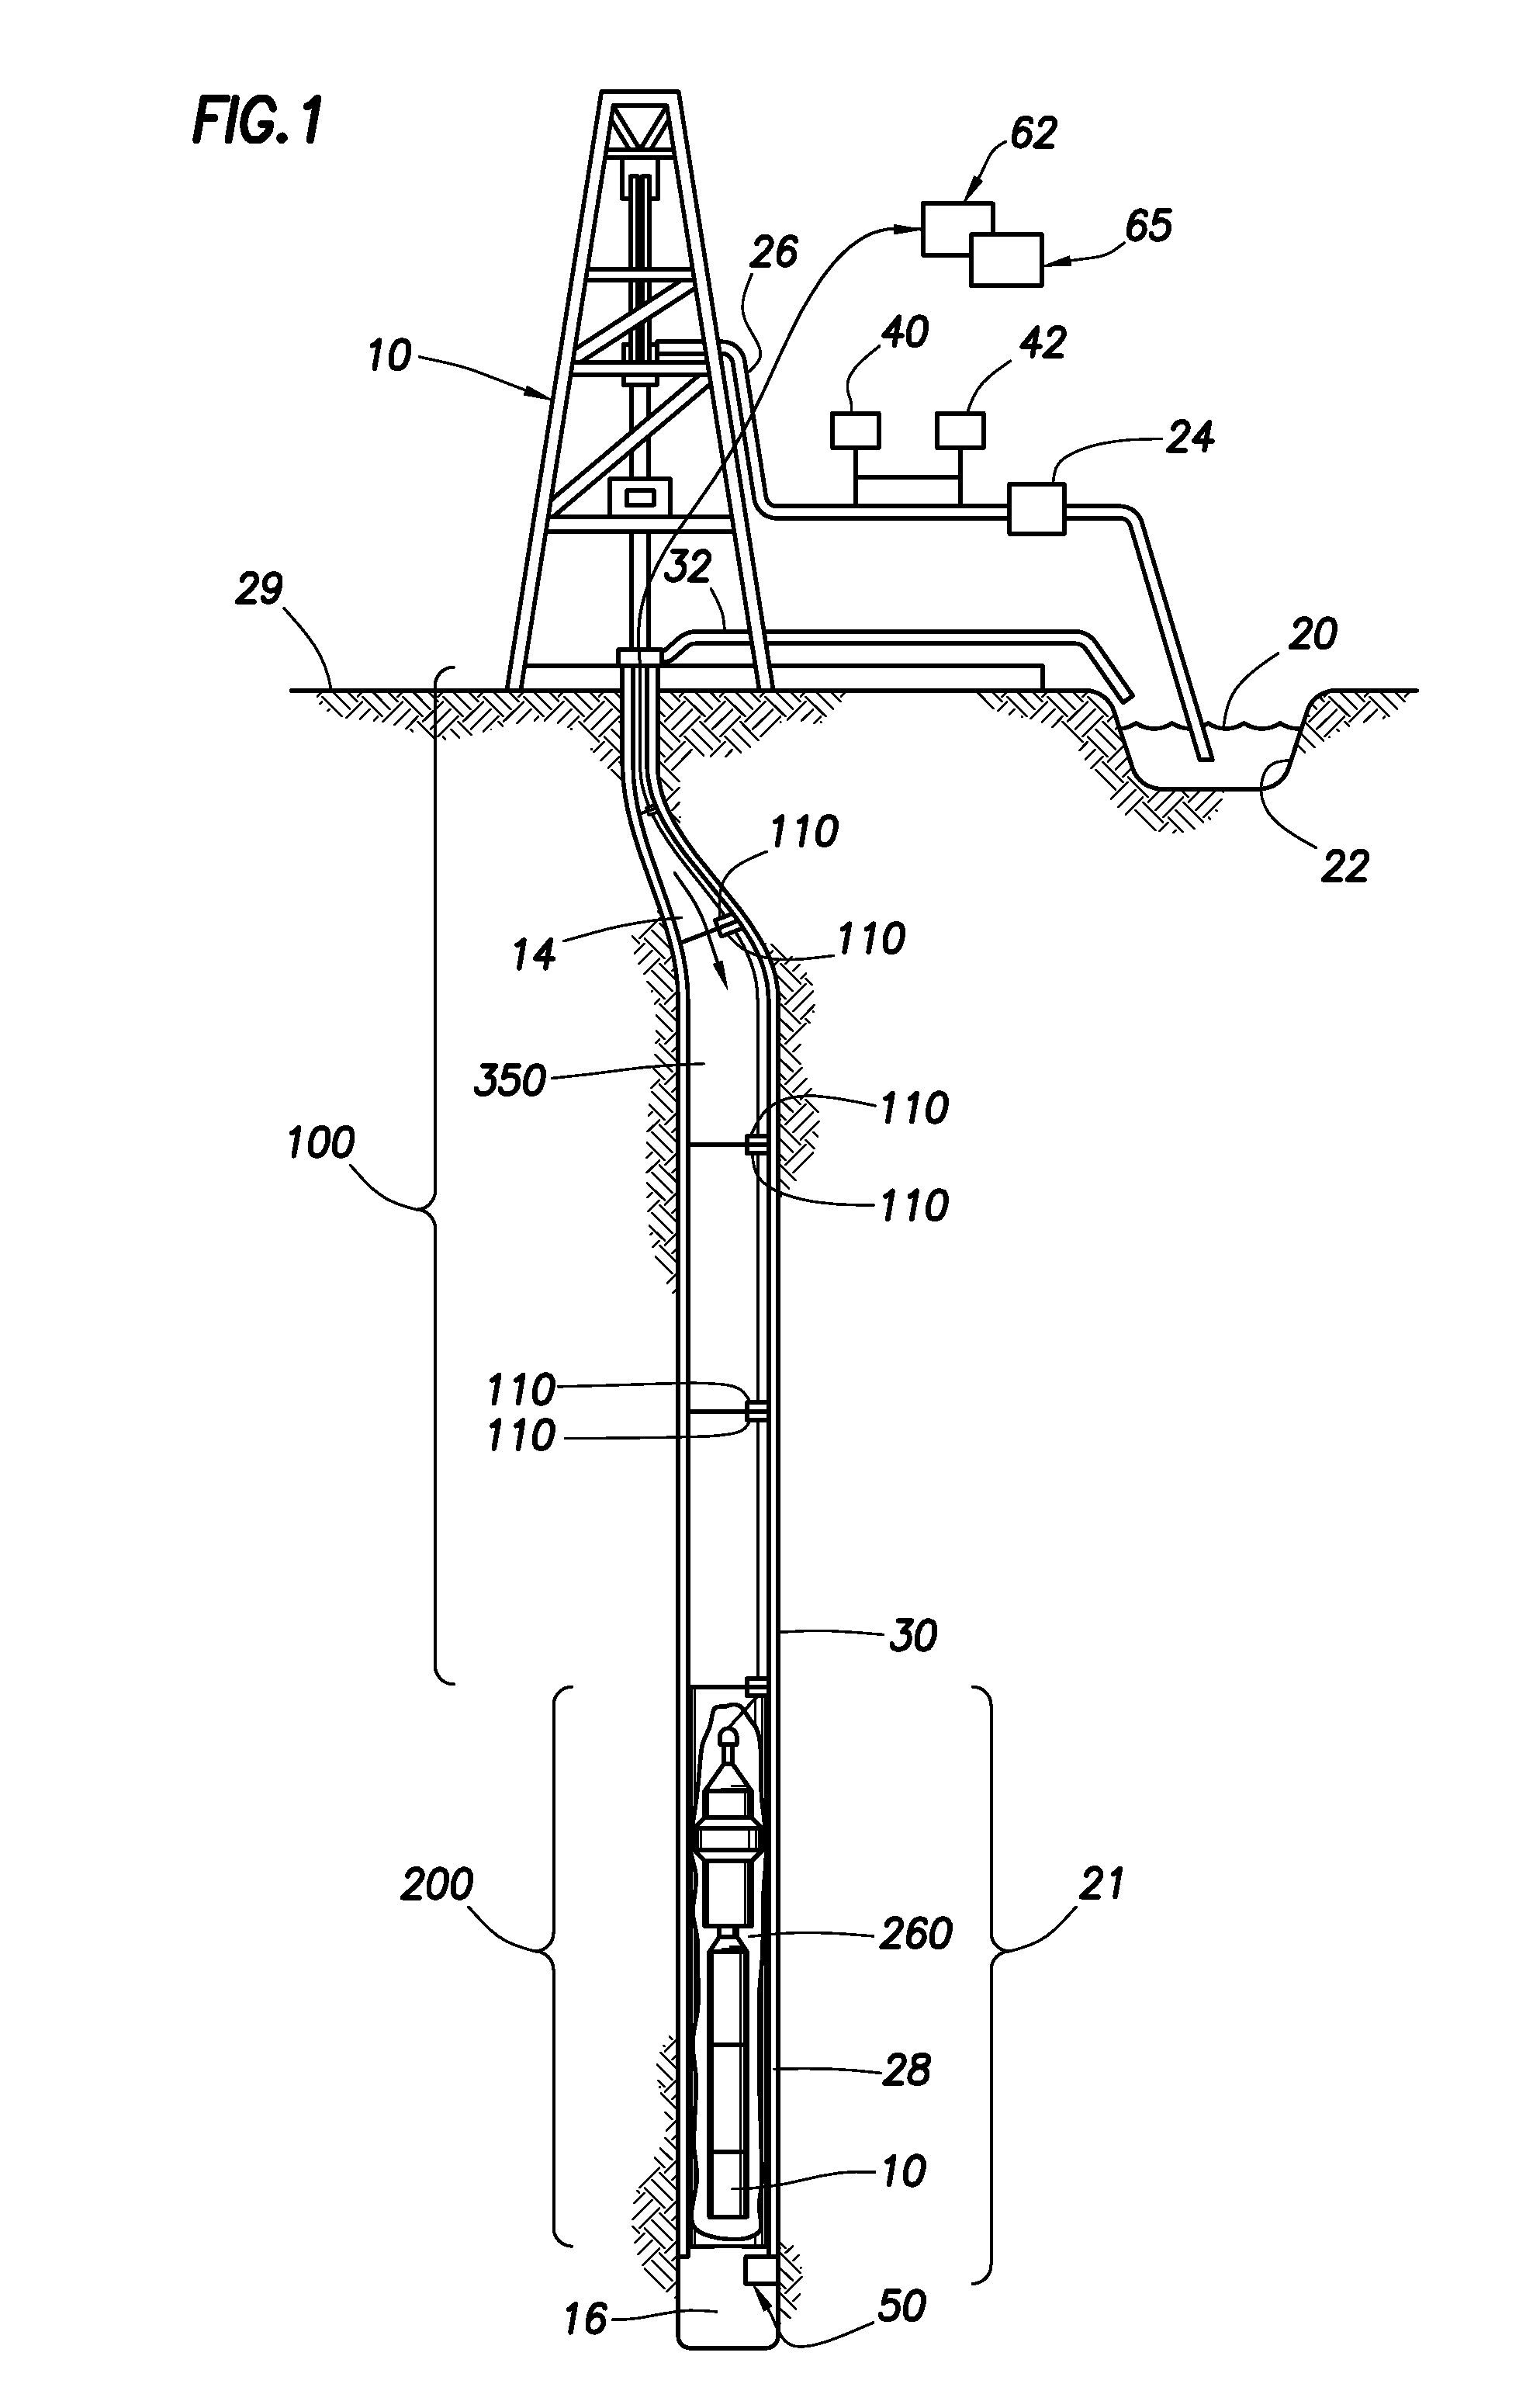 System and Method for Associating Time Stamped Measurement Data with a Corresponding Wellbore Depth